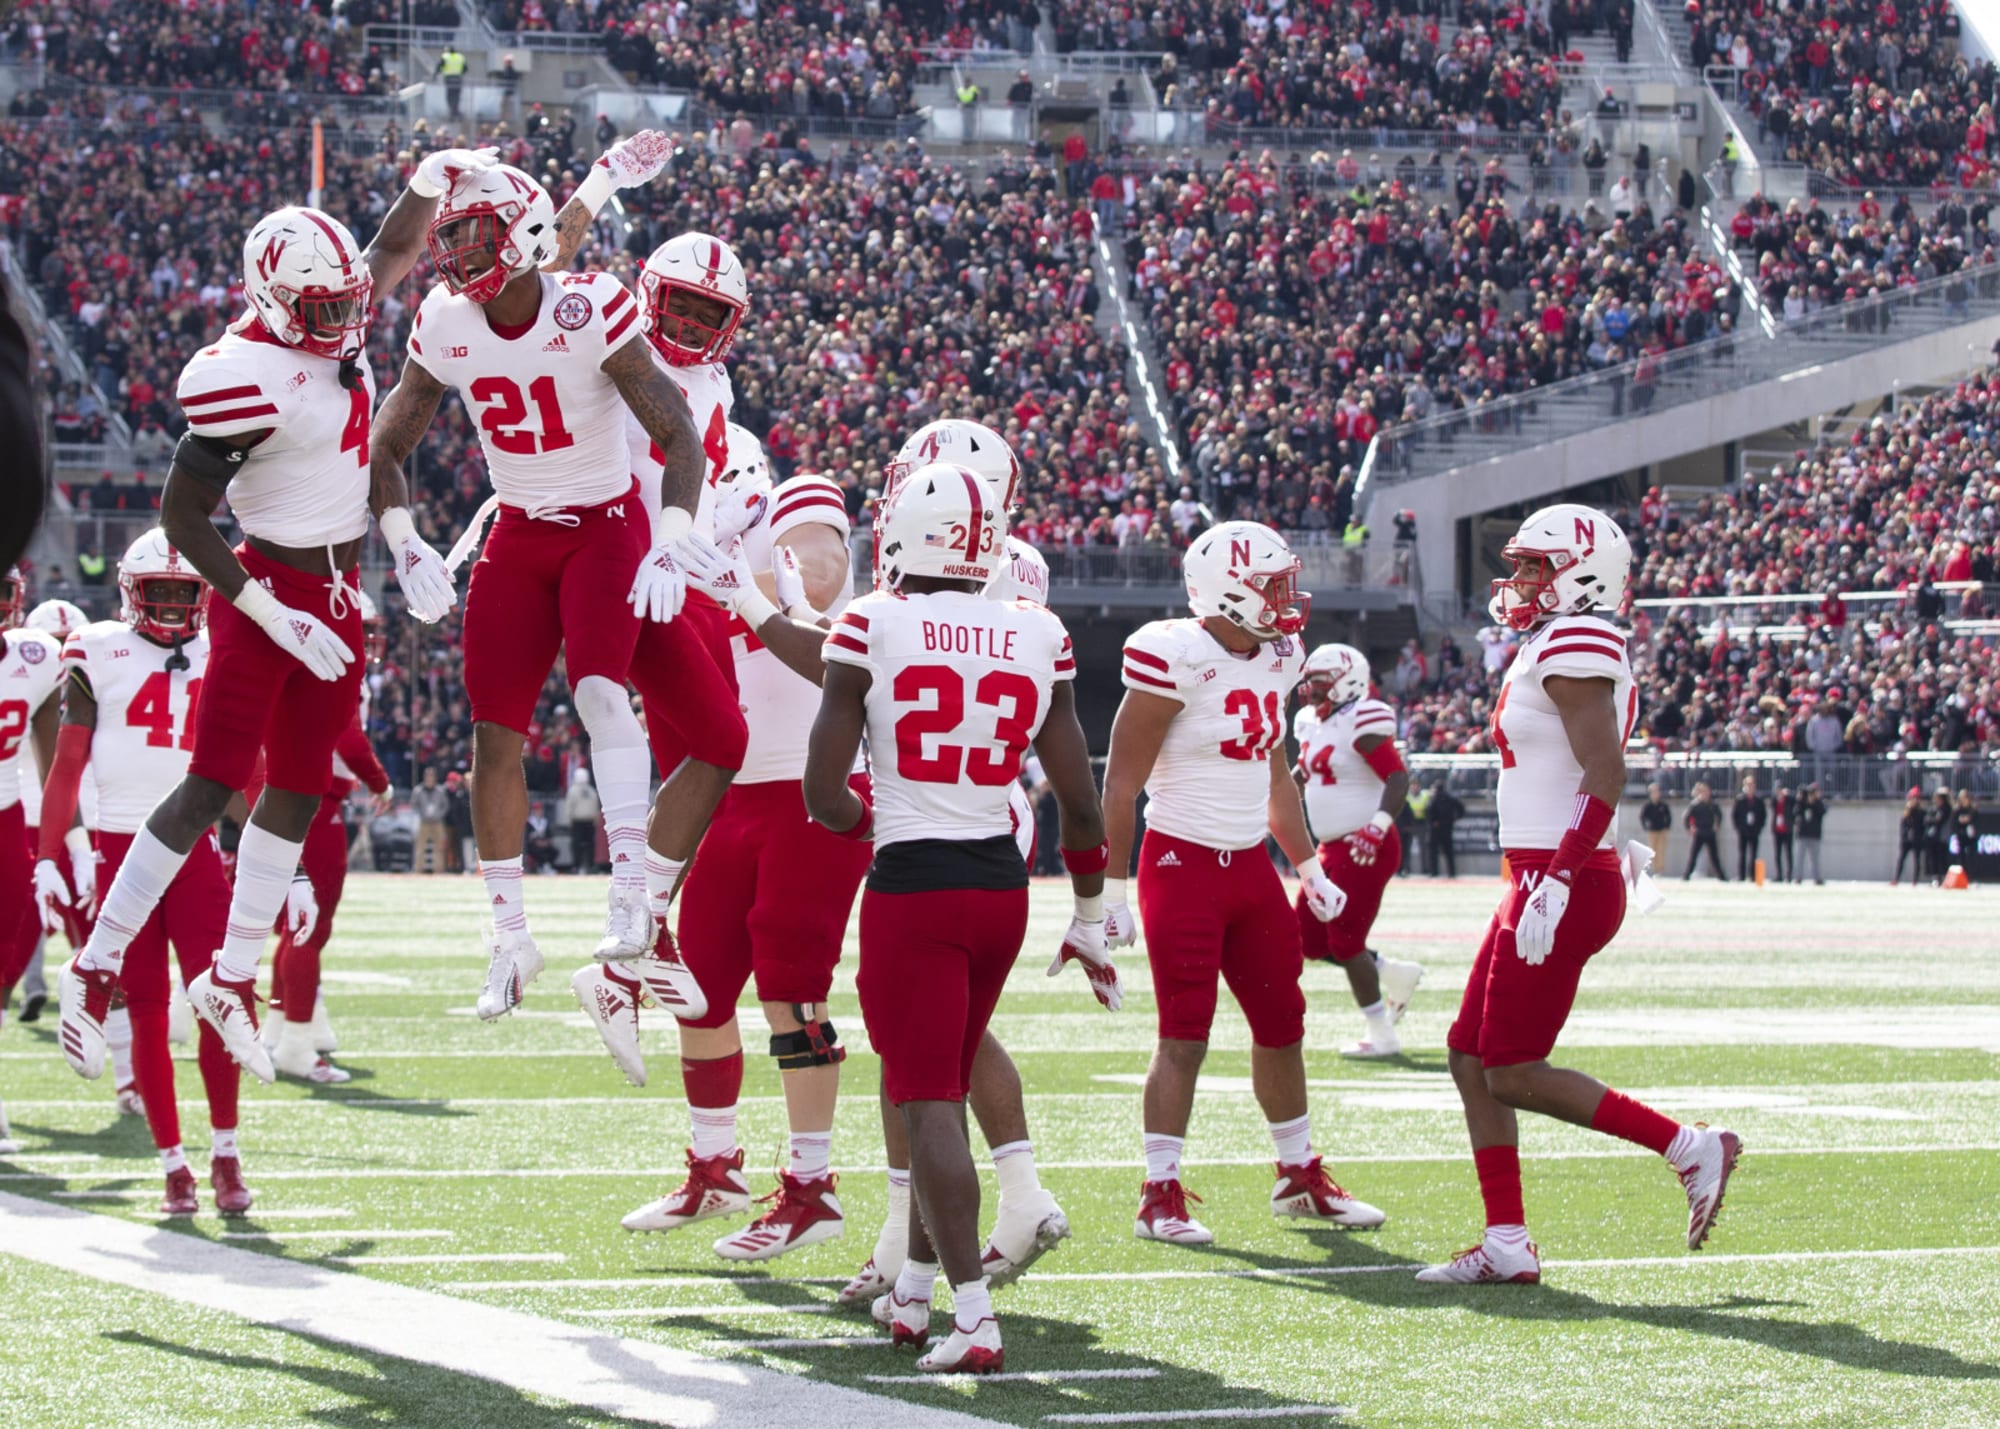 Nebraska Football gives fans hope for future after strong end to 2018